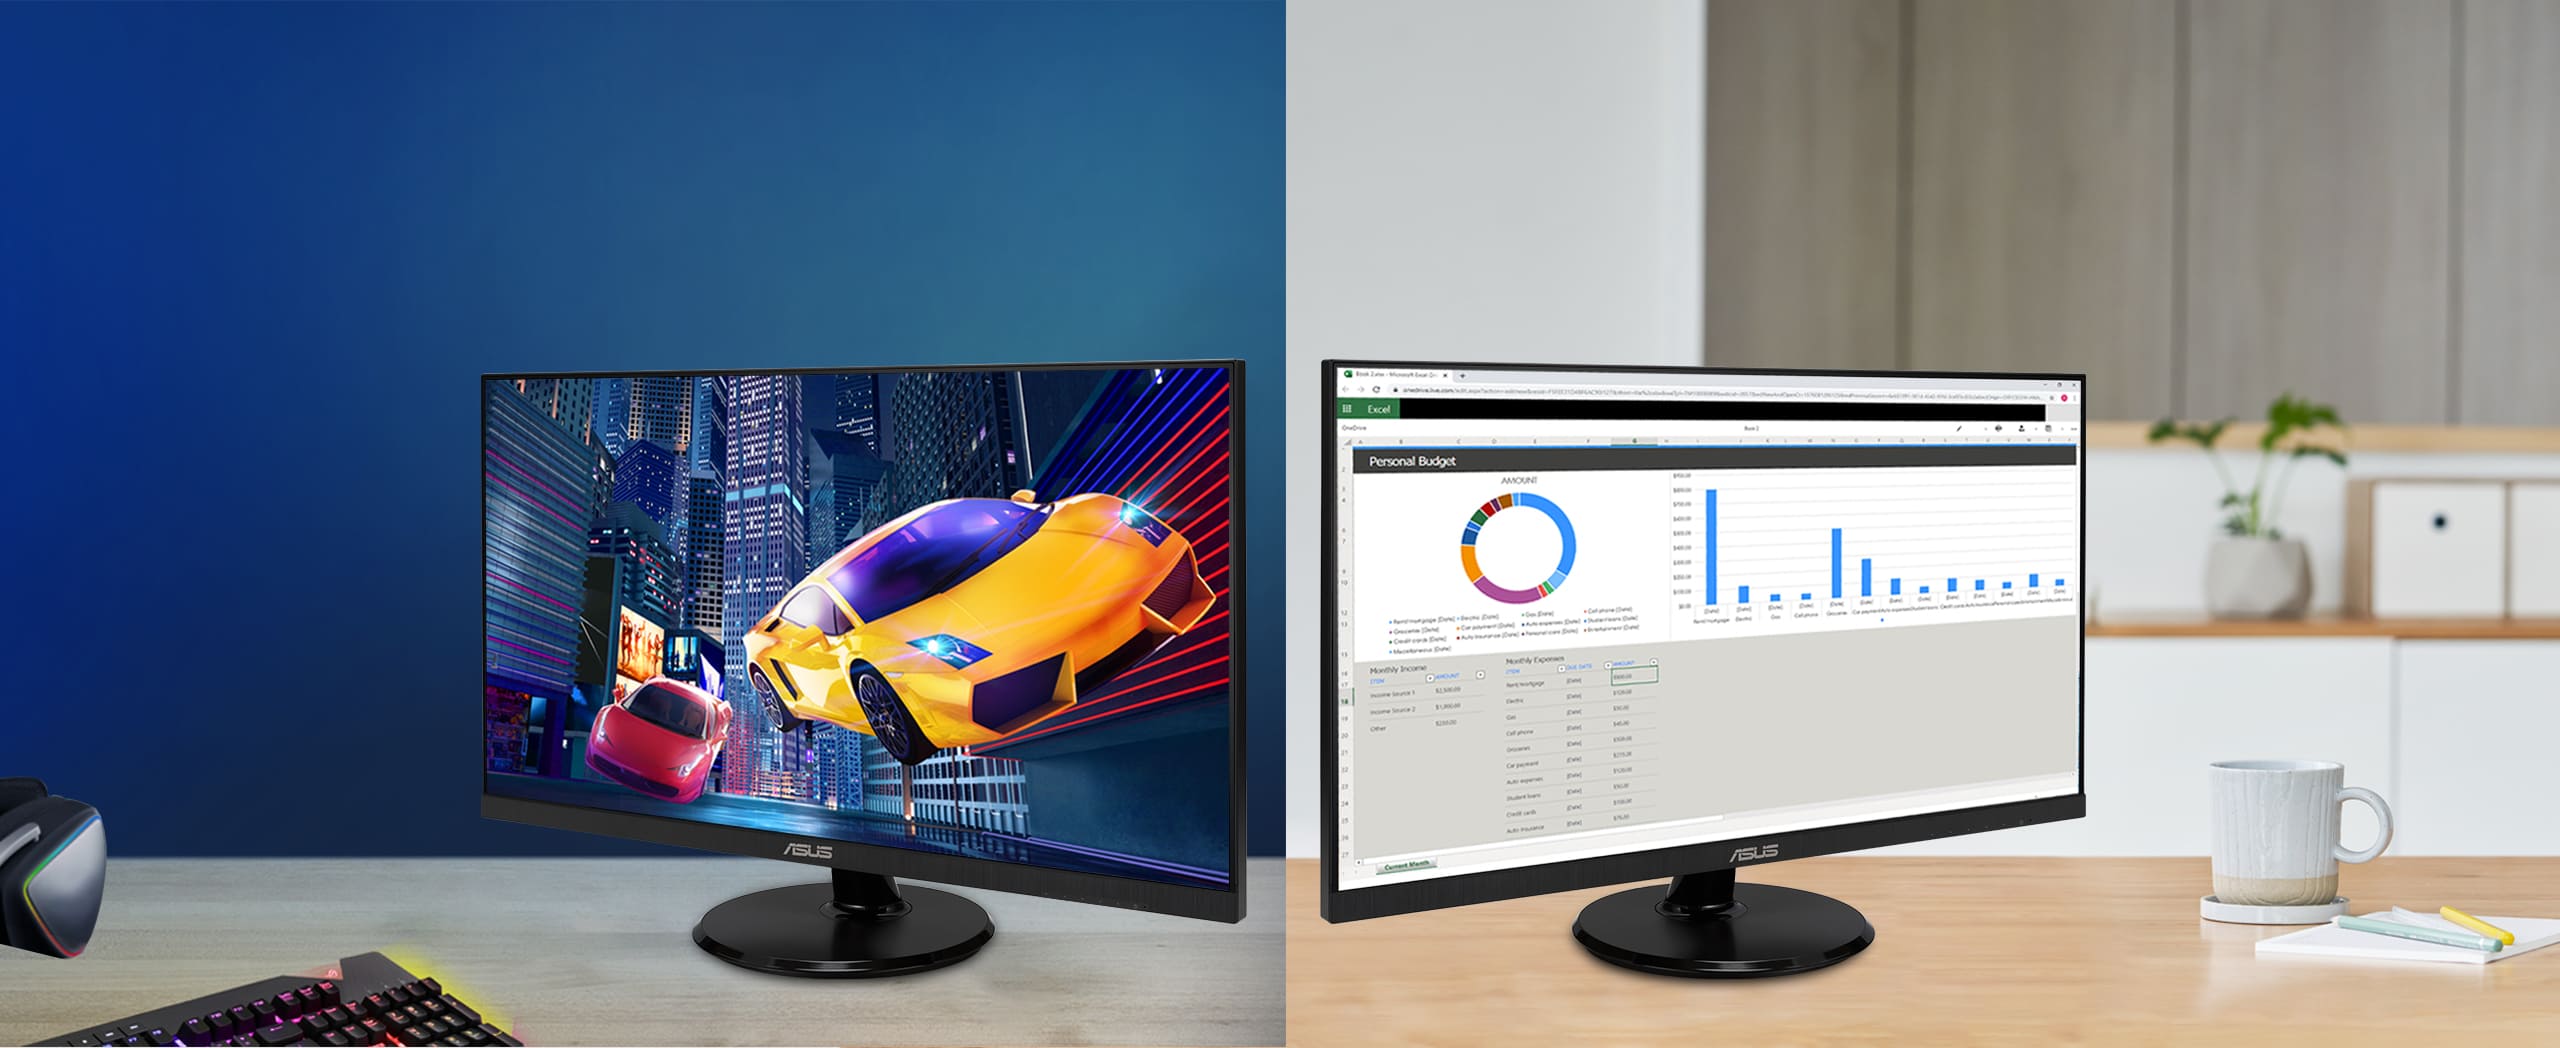 ASUS VA27DQFR is 27-inchIPS Eye Care Gaming monitor with fast 100Hz refresh rate and Adaptive-Sync technology to eliminate screen tearing and choppy frame rates for the smoother-than-ever experience.